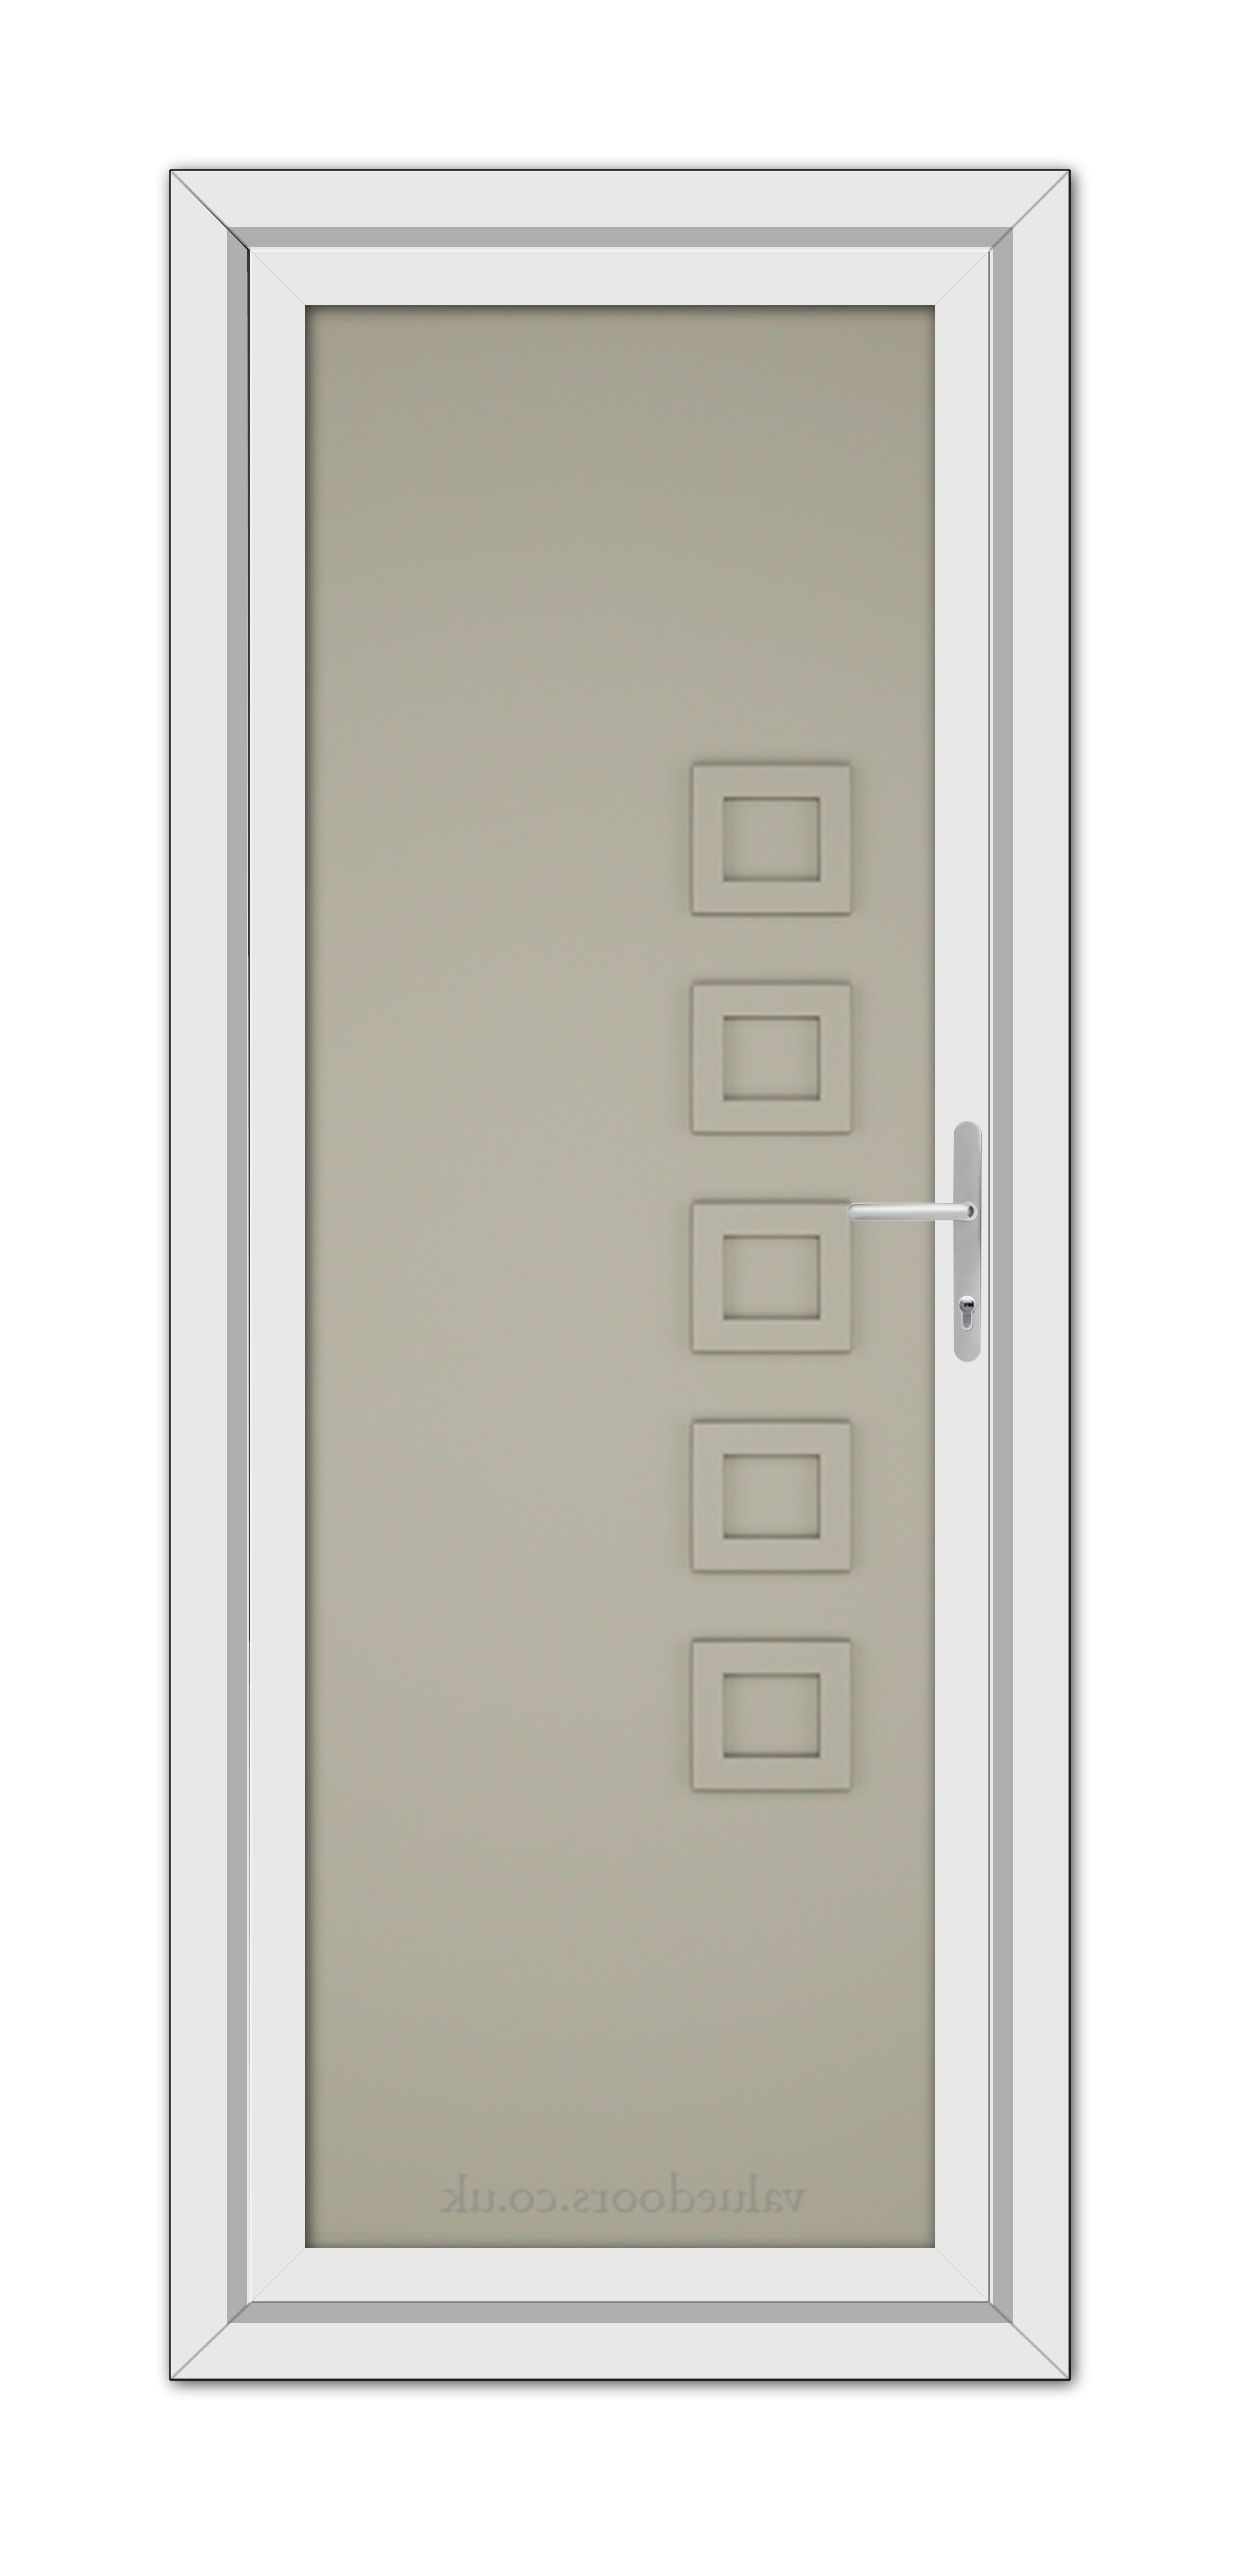 A Pebble Grey Malaga Solid uPVC Door with five horizontal panels and a silver handle, framed by a white border.